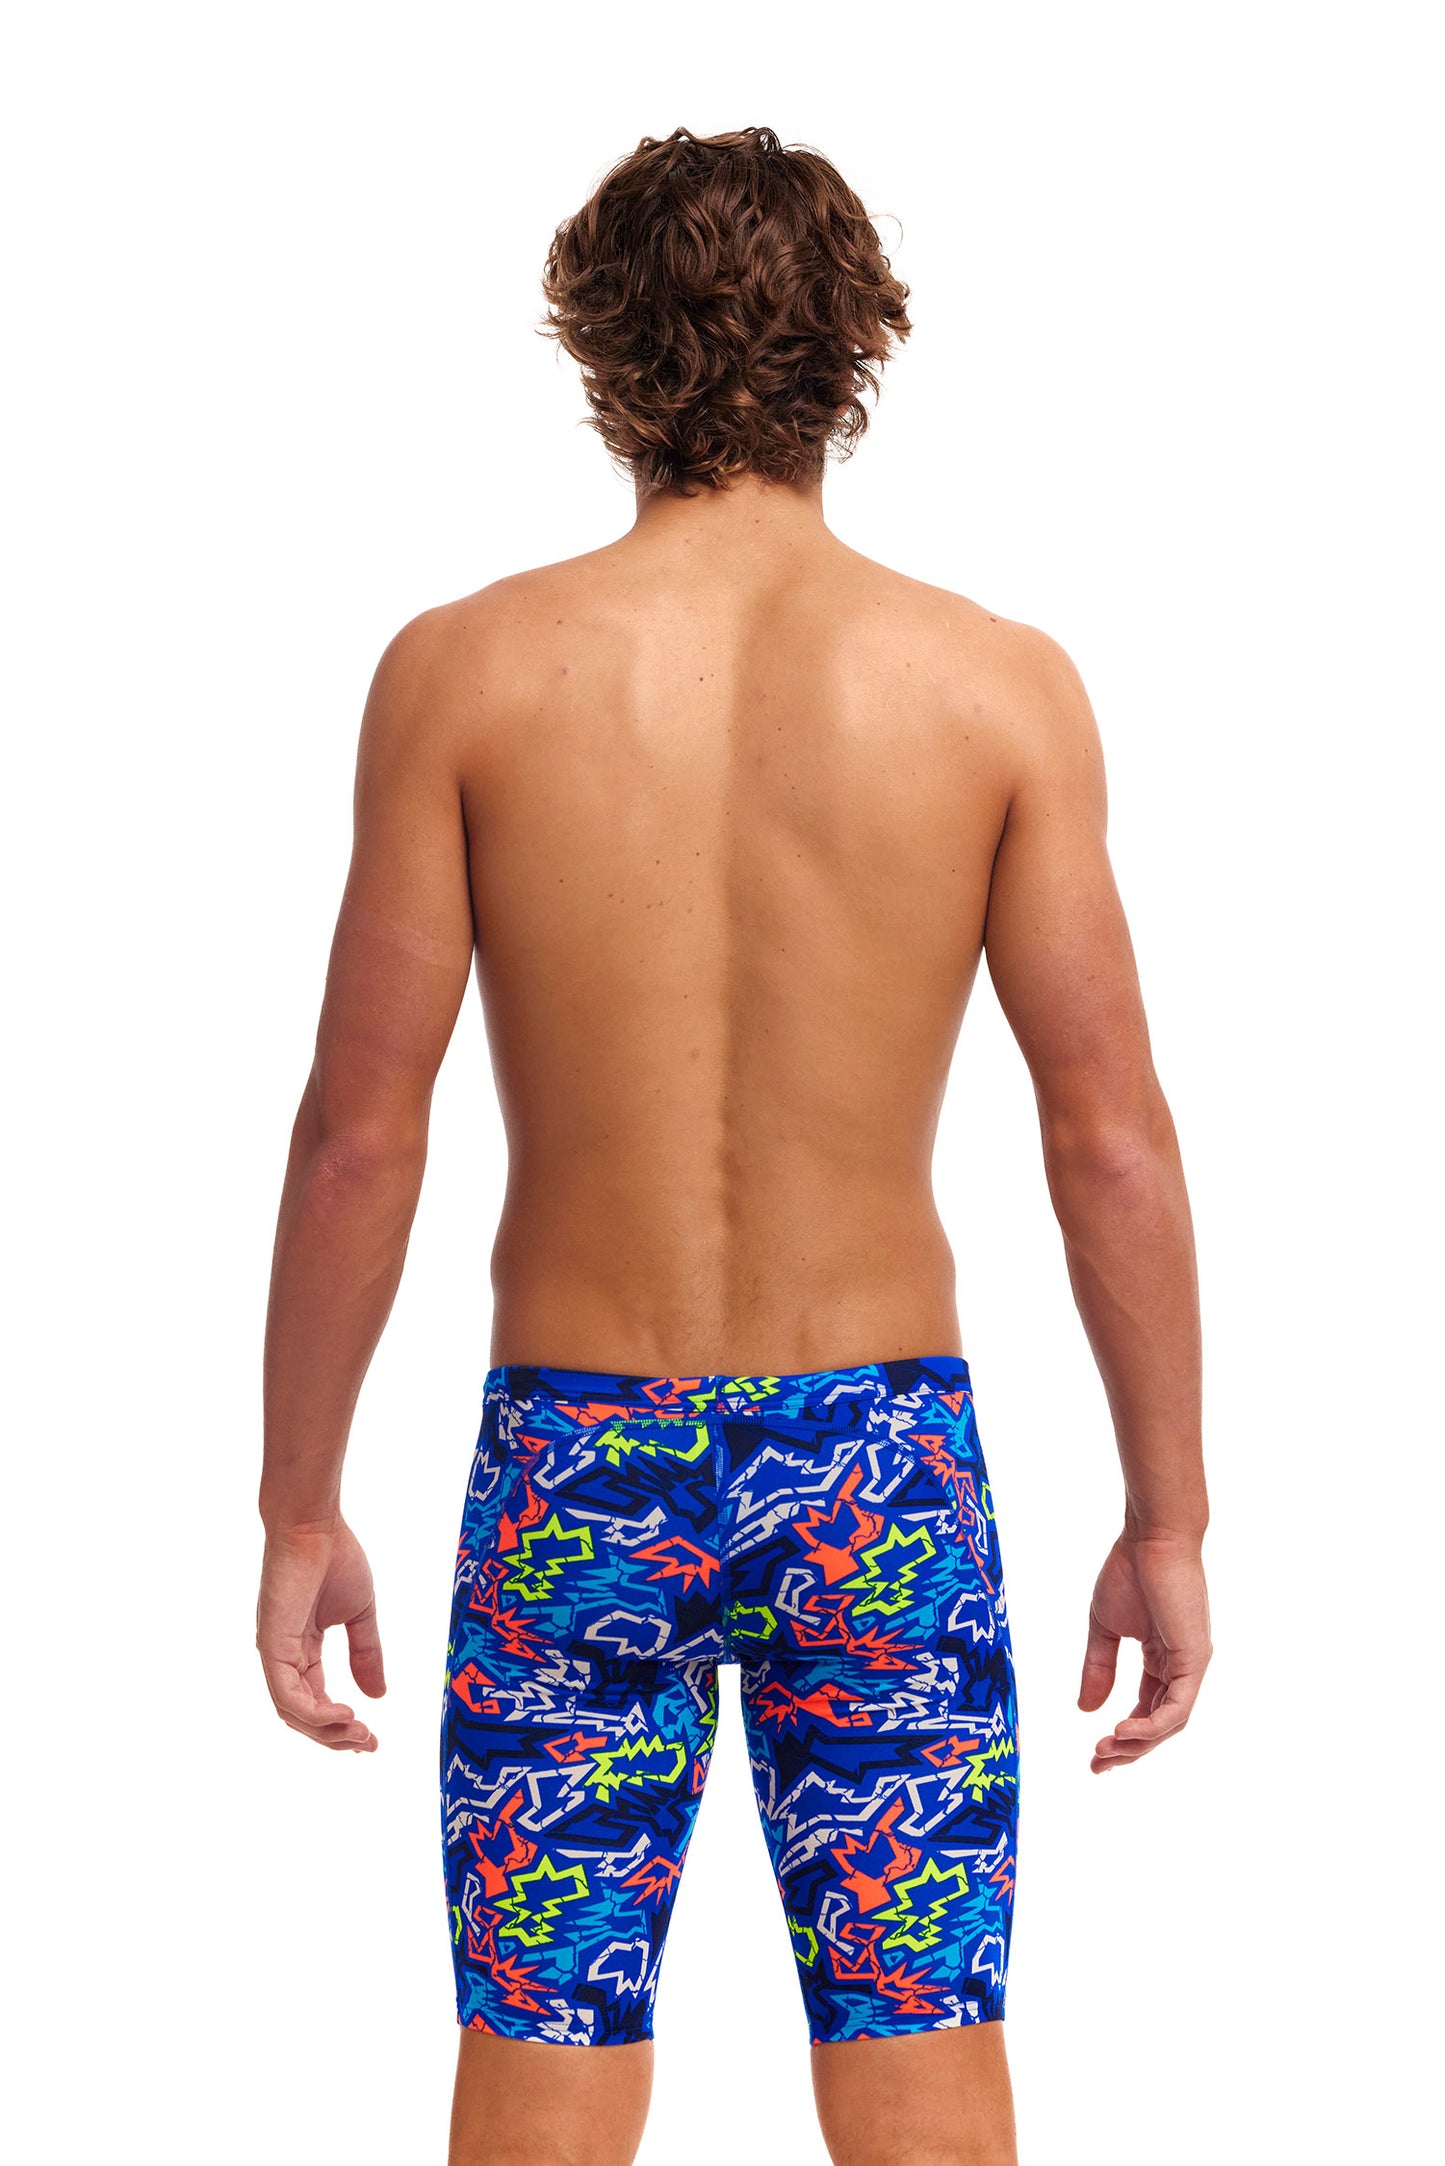 NEW! Funky Trunks Mens Eco Training Jammers Broken Hearts